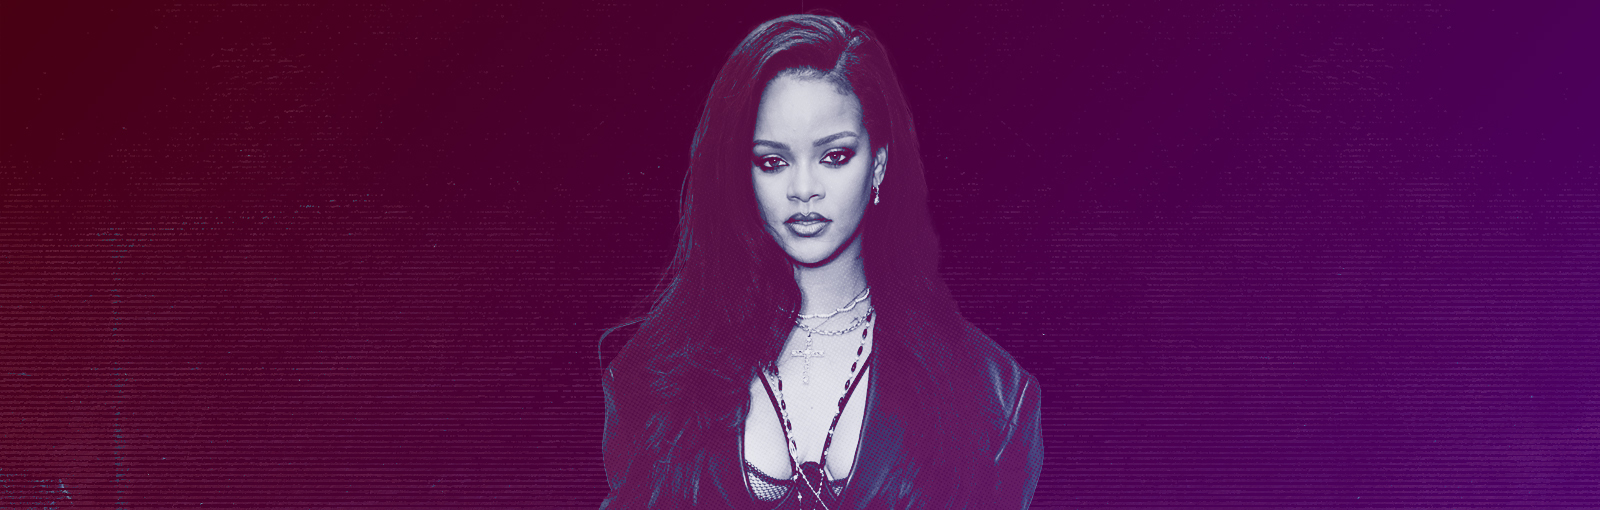 The Best Rihanna Songs Ranked - roblox 4th of july by shooter jennings song code